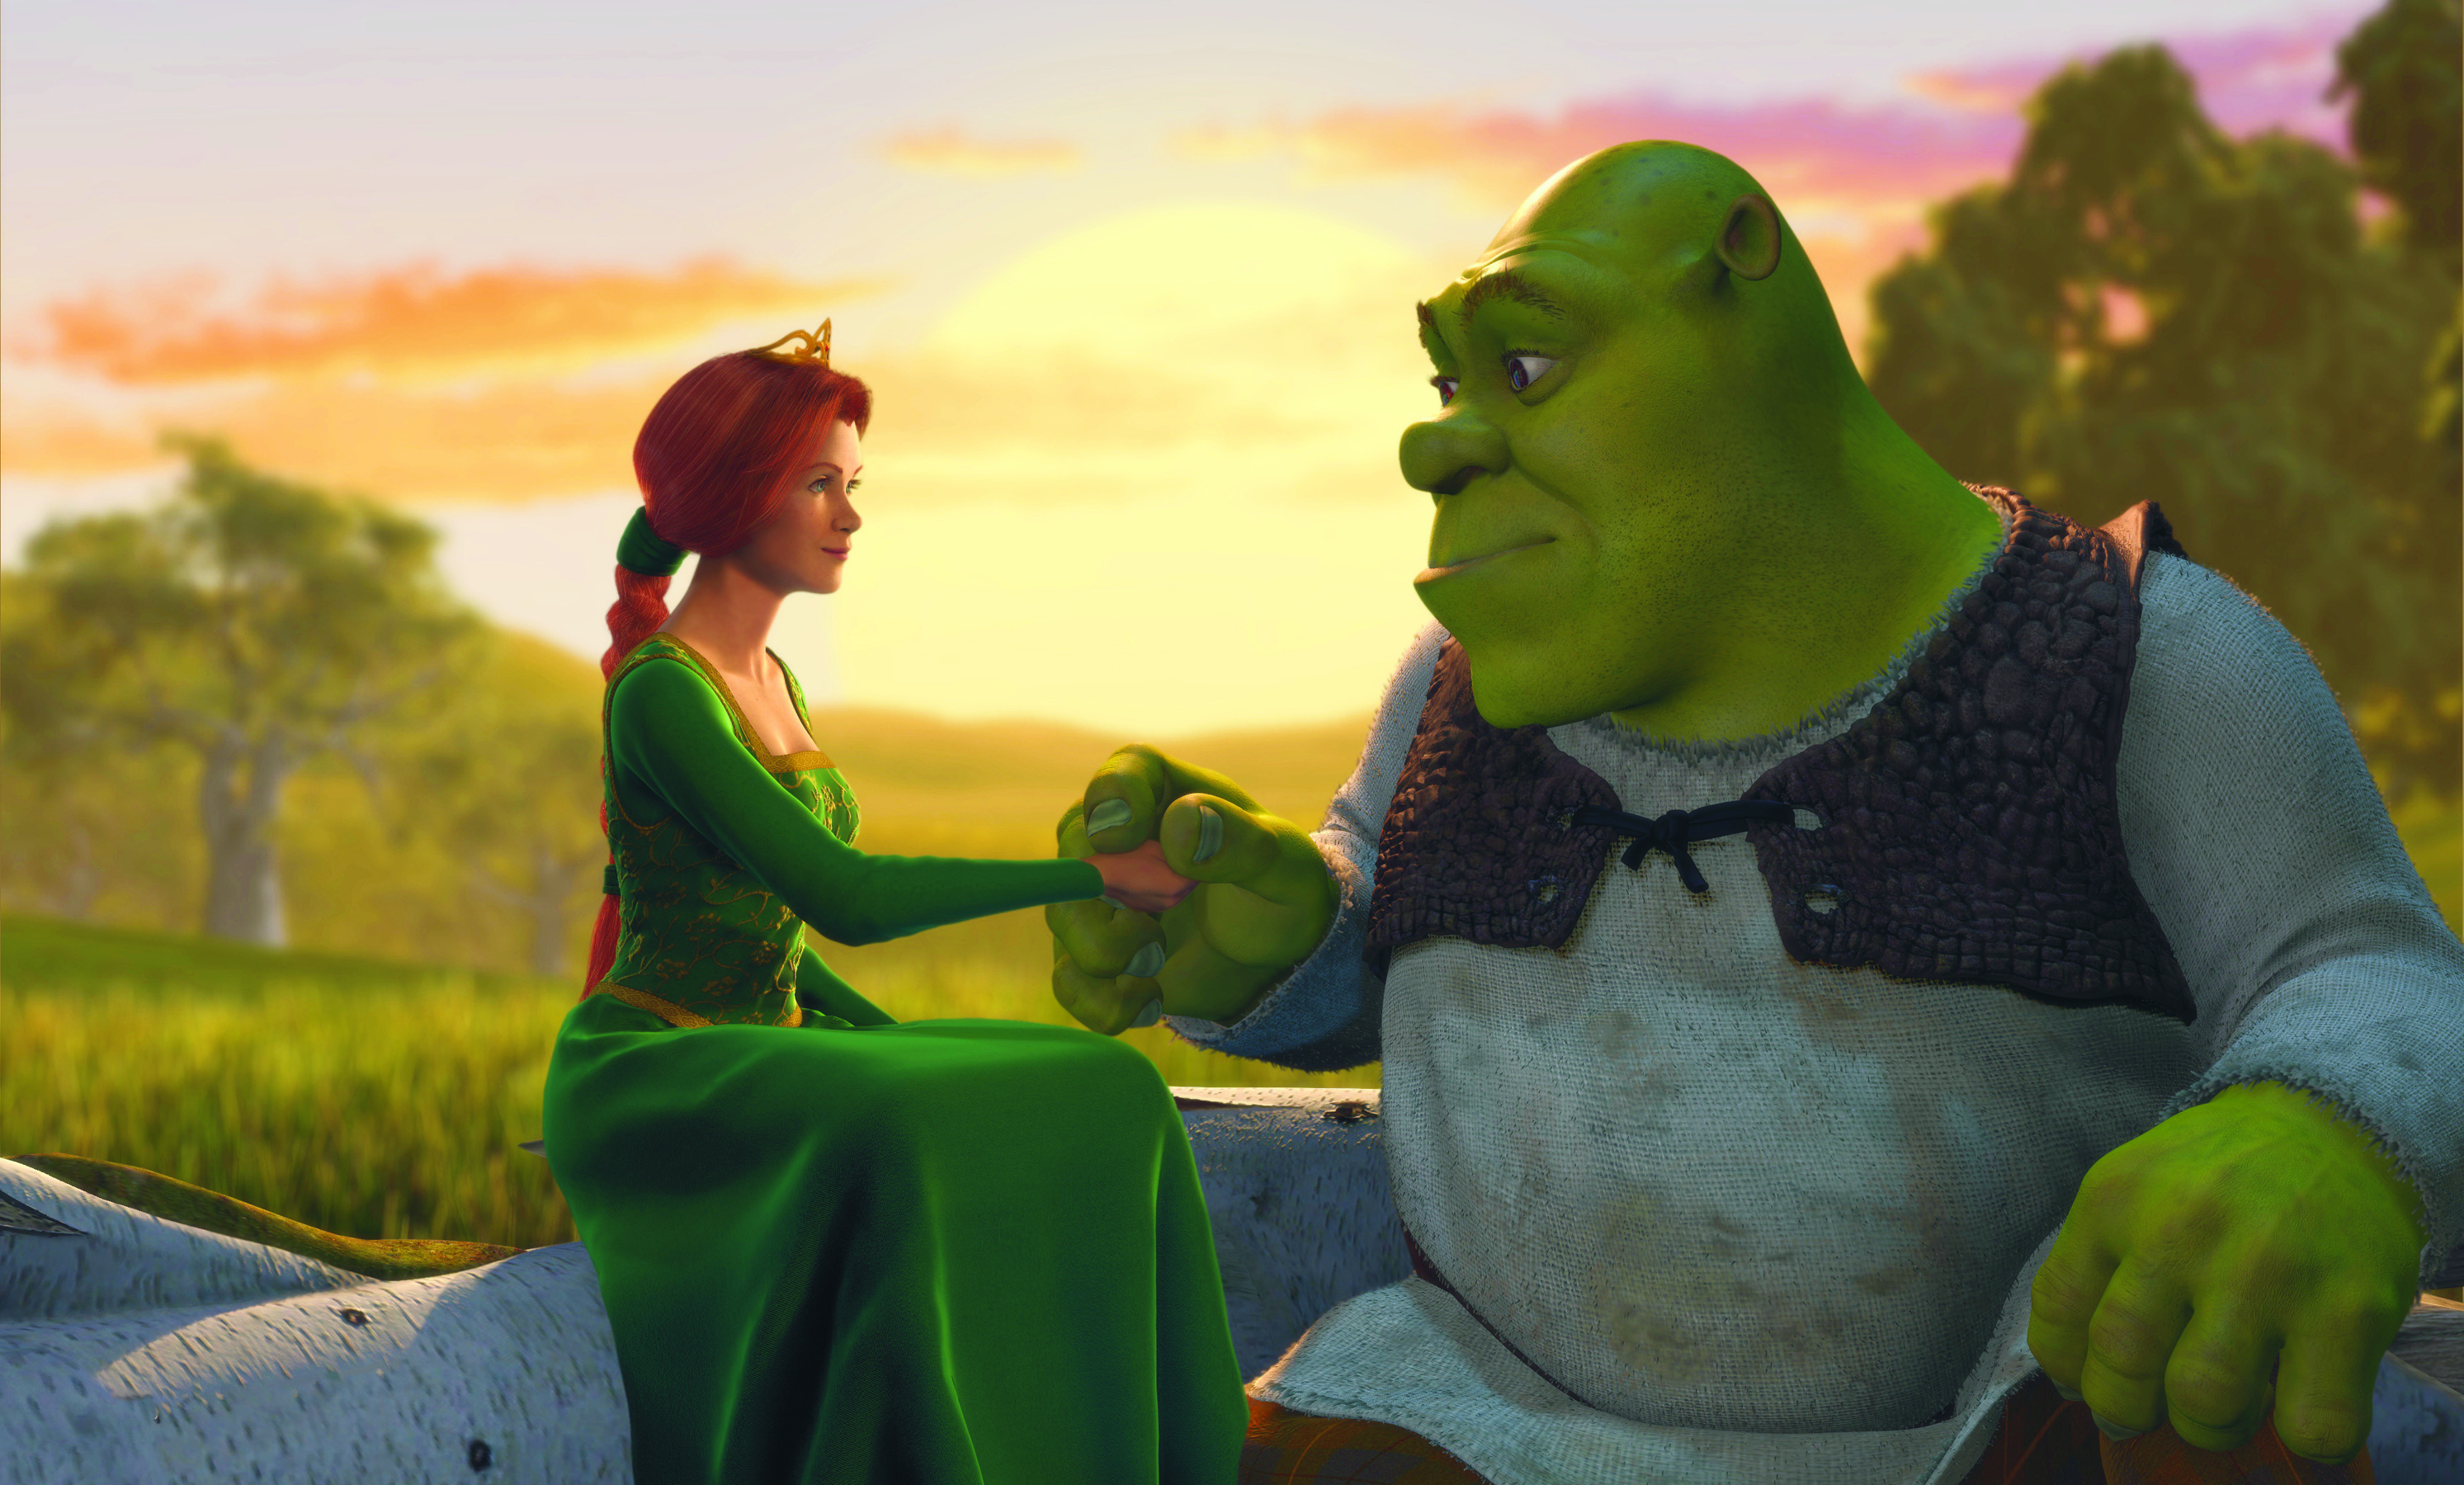 Shrek and Fiona in love, a central theme of Shrek